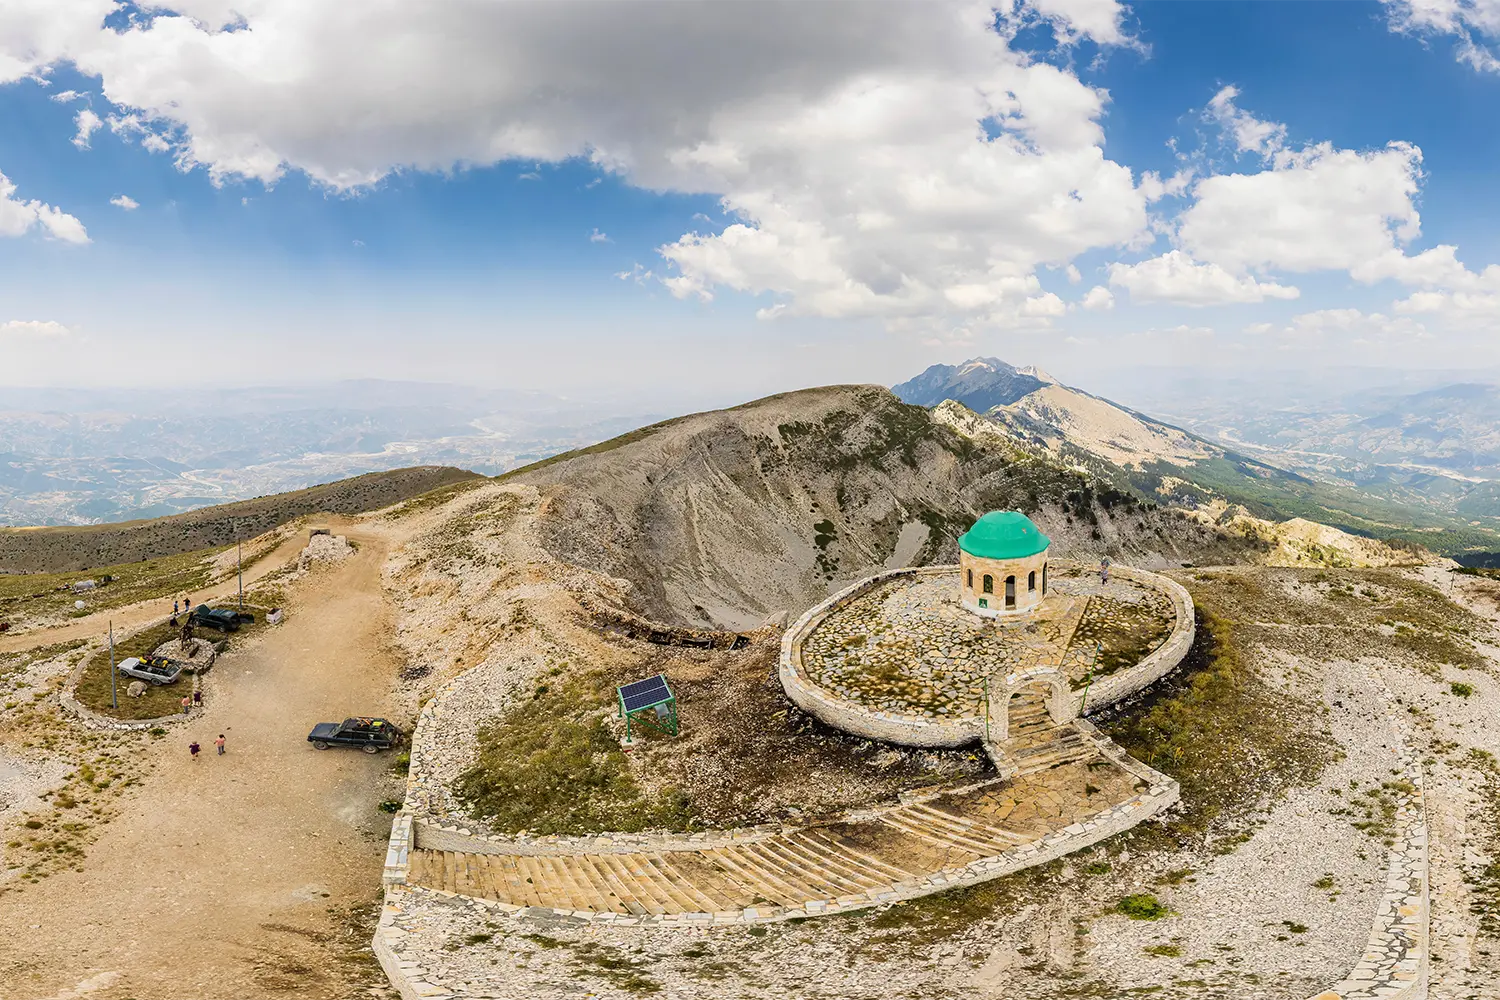 Mount Tomorr in the Tomorr National Park with Shrine (tyrbe) of Abbas ibn Ali on the top in Summer, Albania